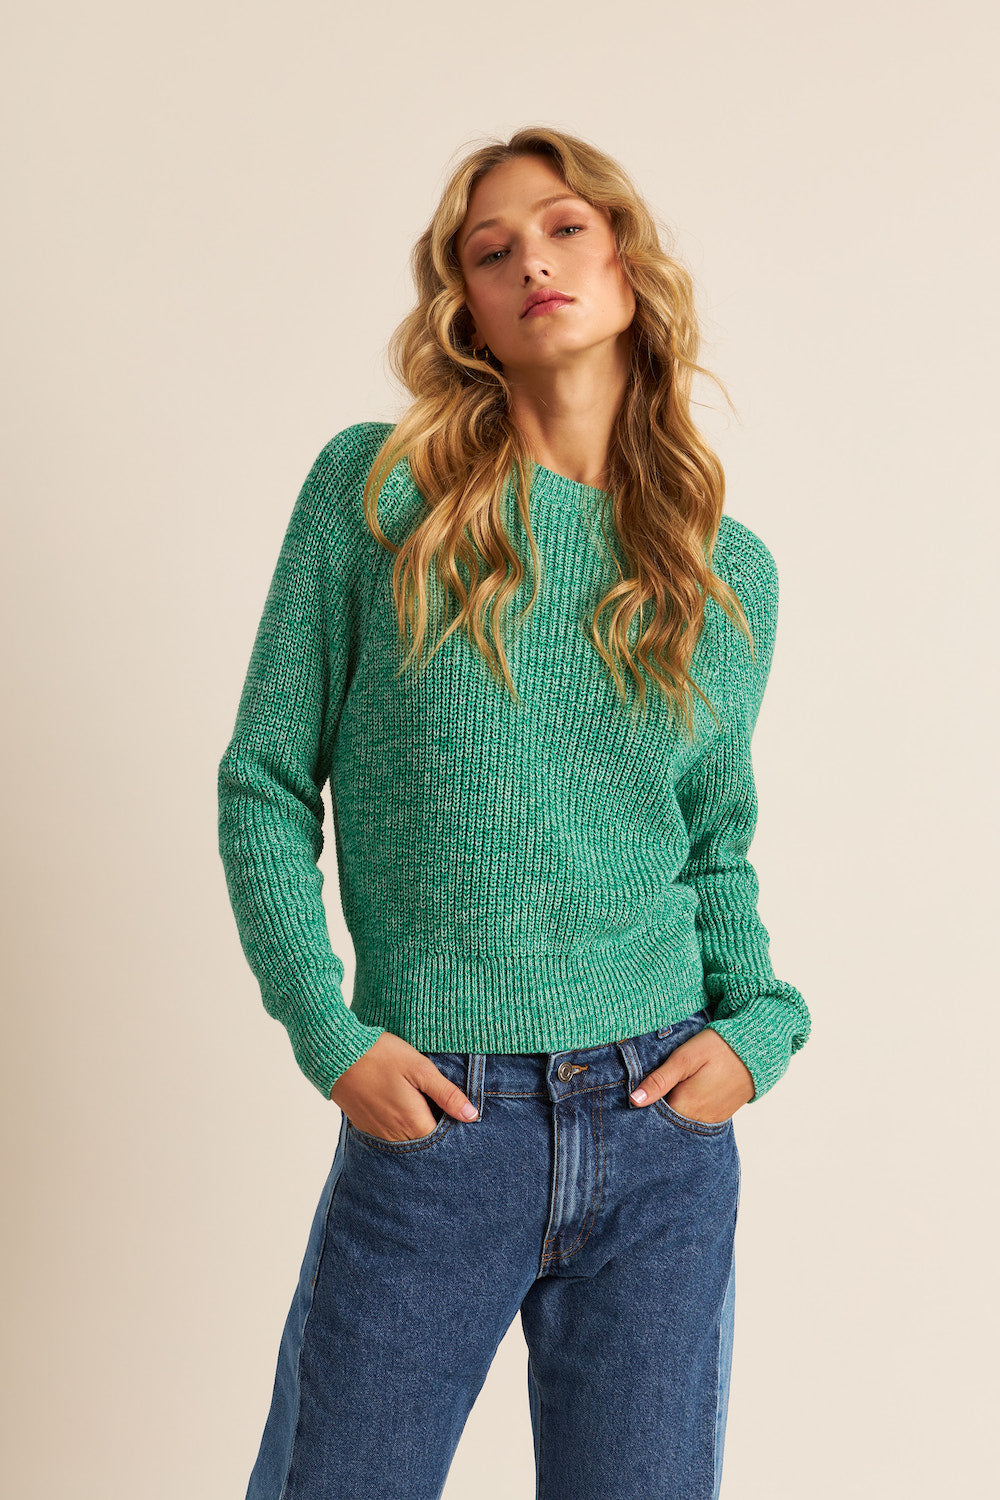 John & Jenn Silas Sweater - Lucky Charm Clothing - Tops - Sweaters - Pullovers - Heavy Knit Pullovers by John & Jenn | Grace the Boutique